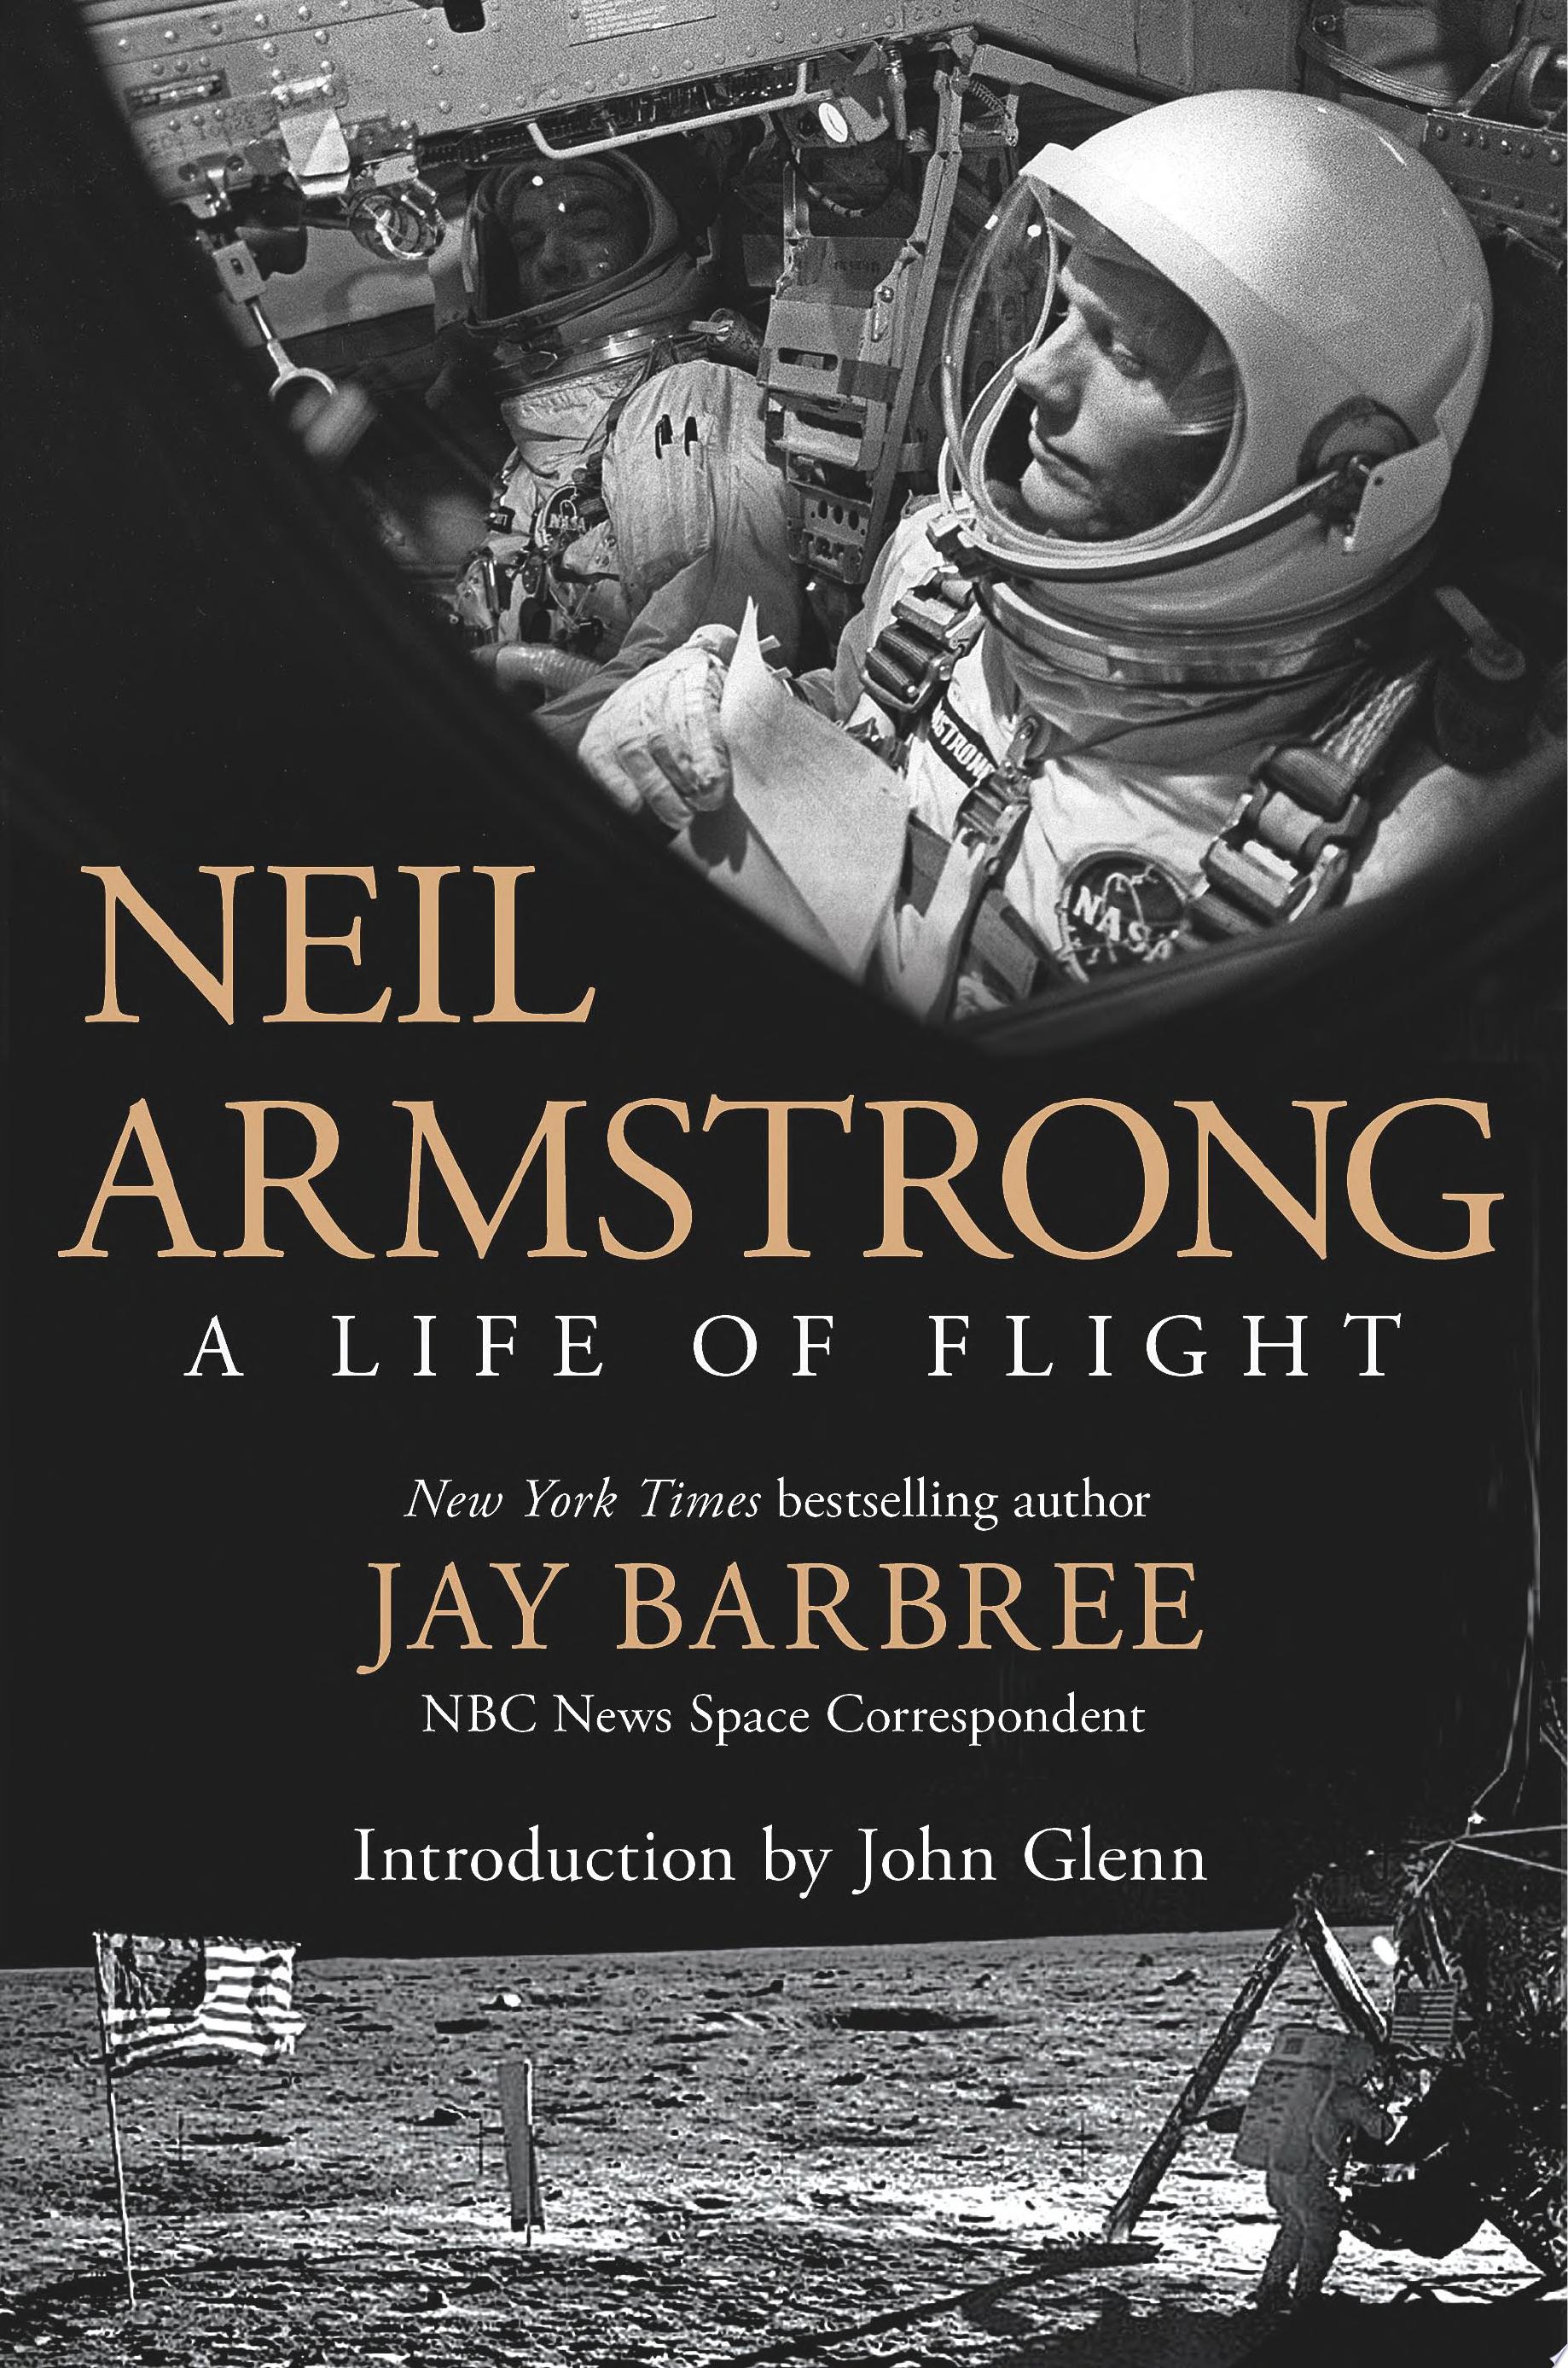 Image for "Neil Armstrong"